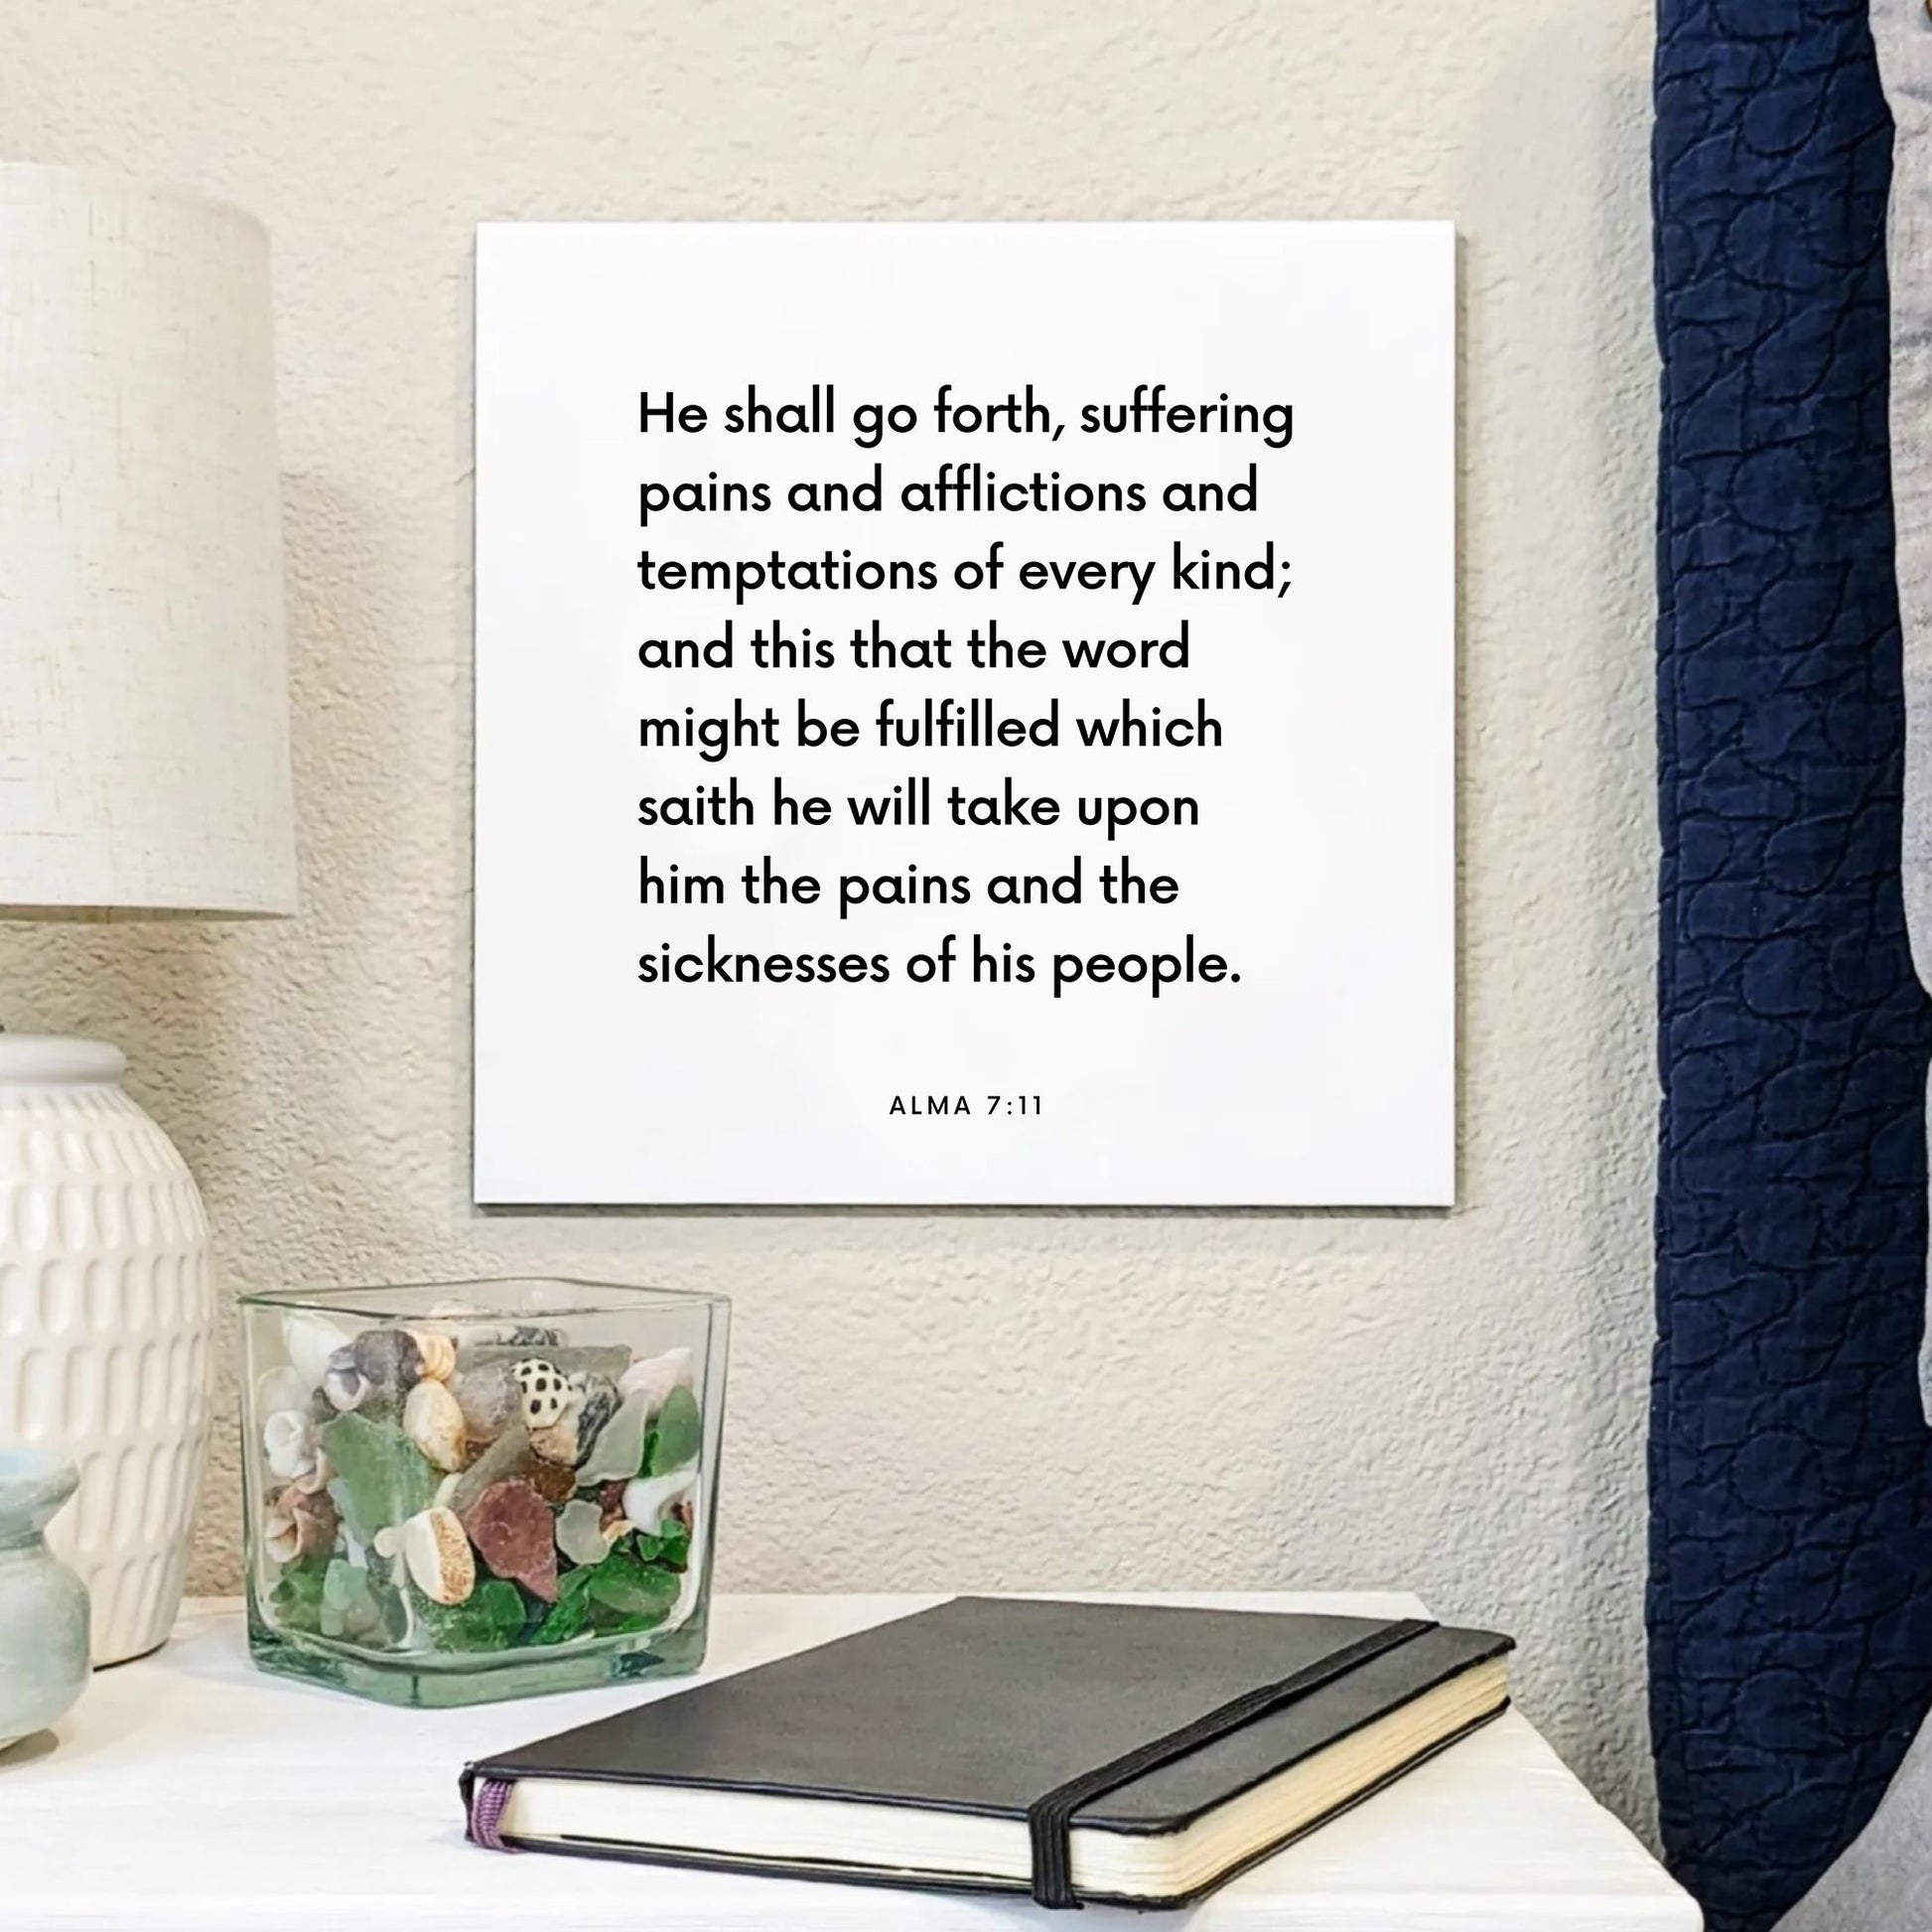 Bedside mouting of the scripture tile for Alma 7:11 - "He will take upon him the pains and sicknesses of his people"